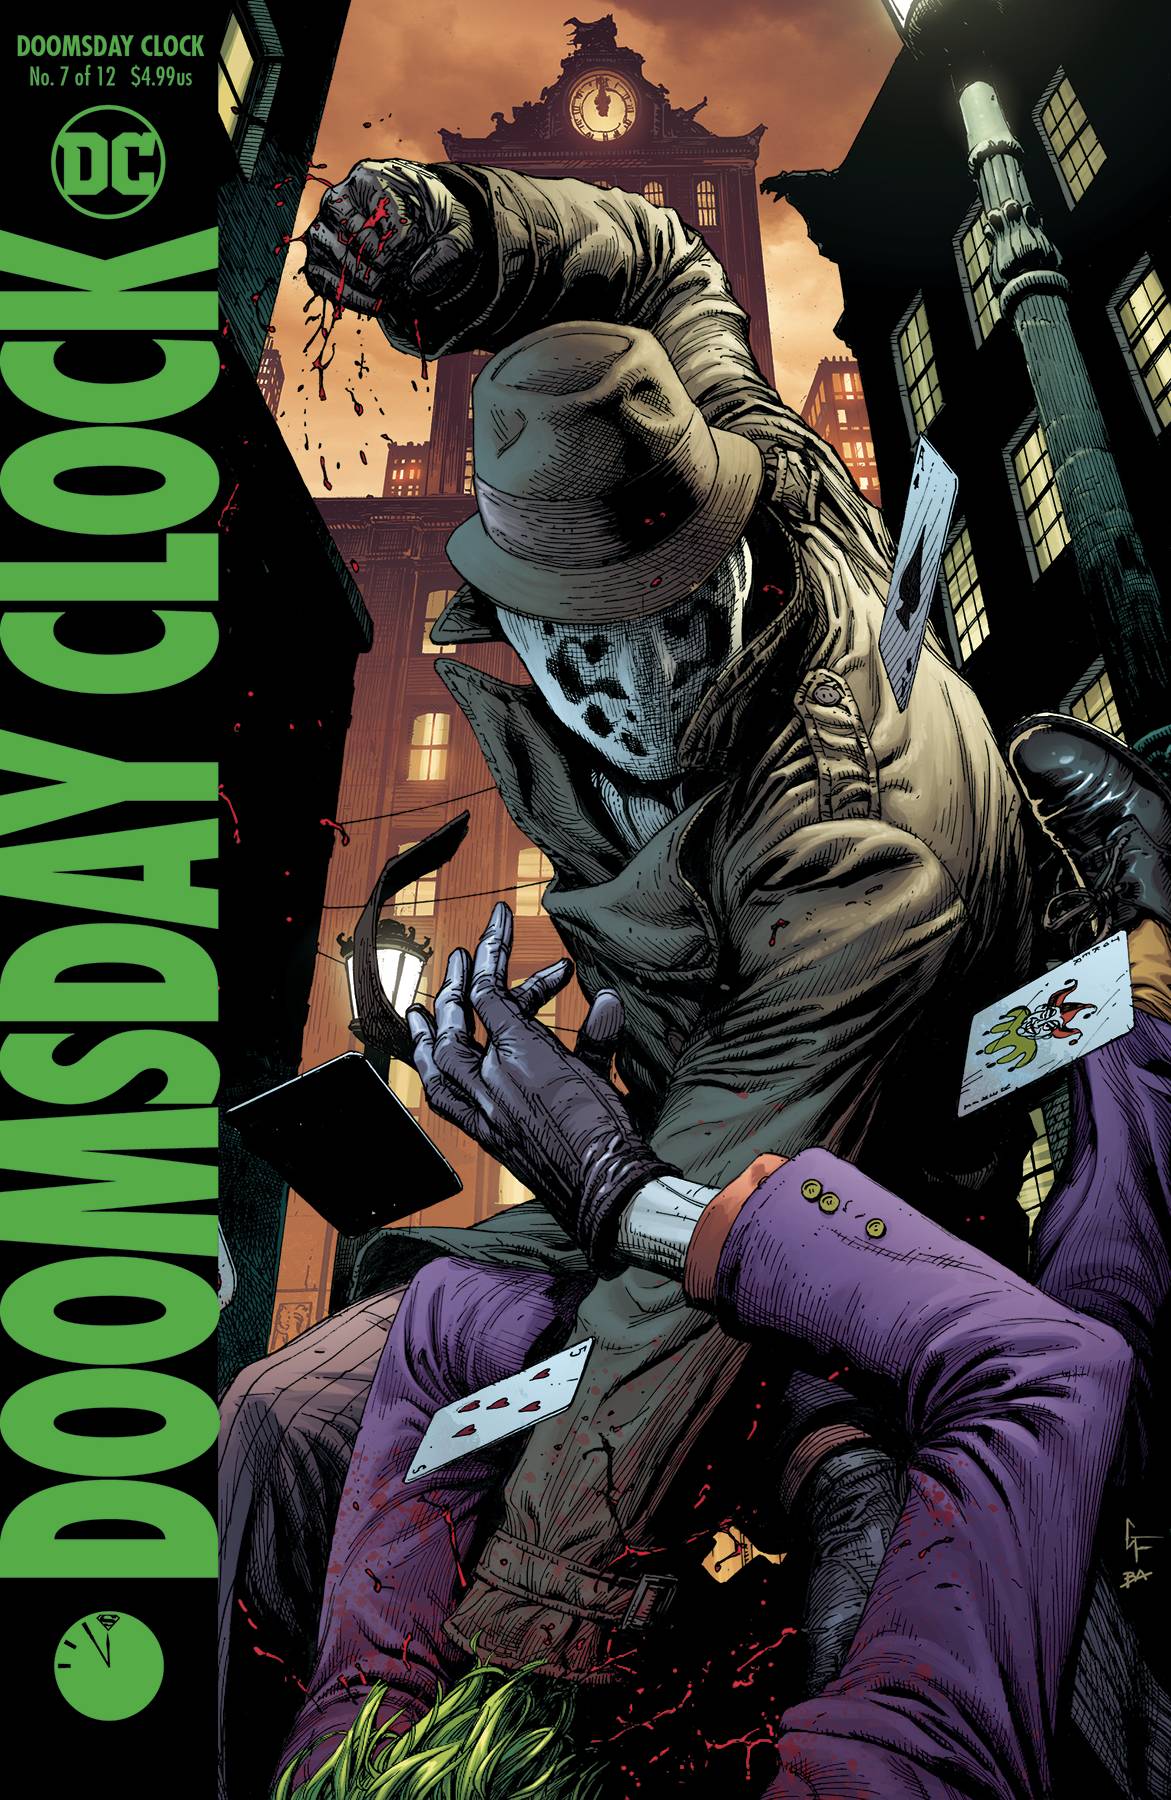 Doomsday Clock #7 Variant Edition (Of 12)